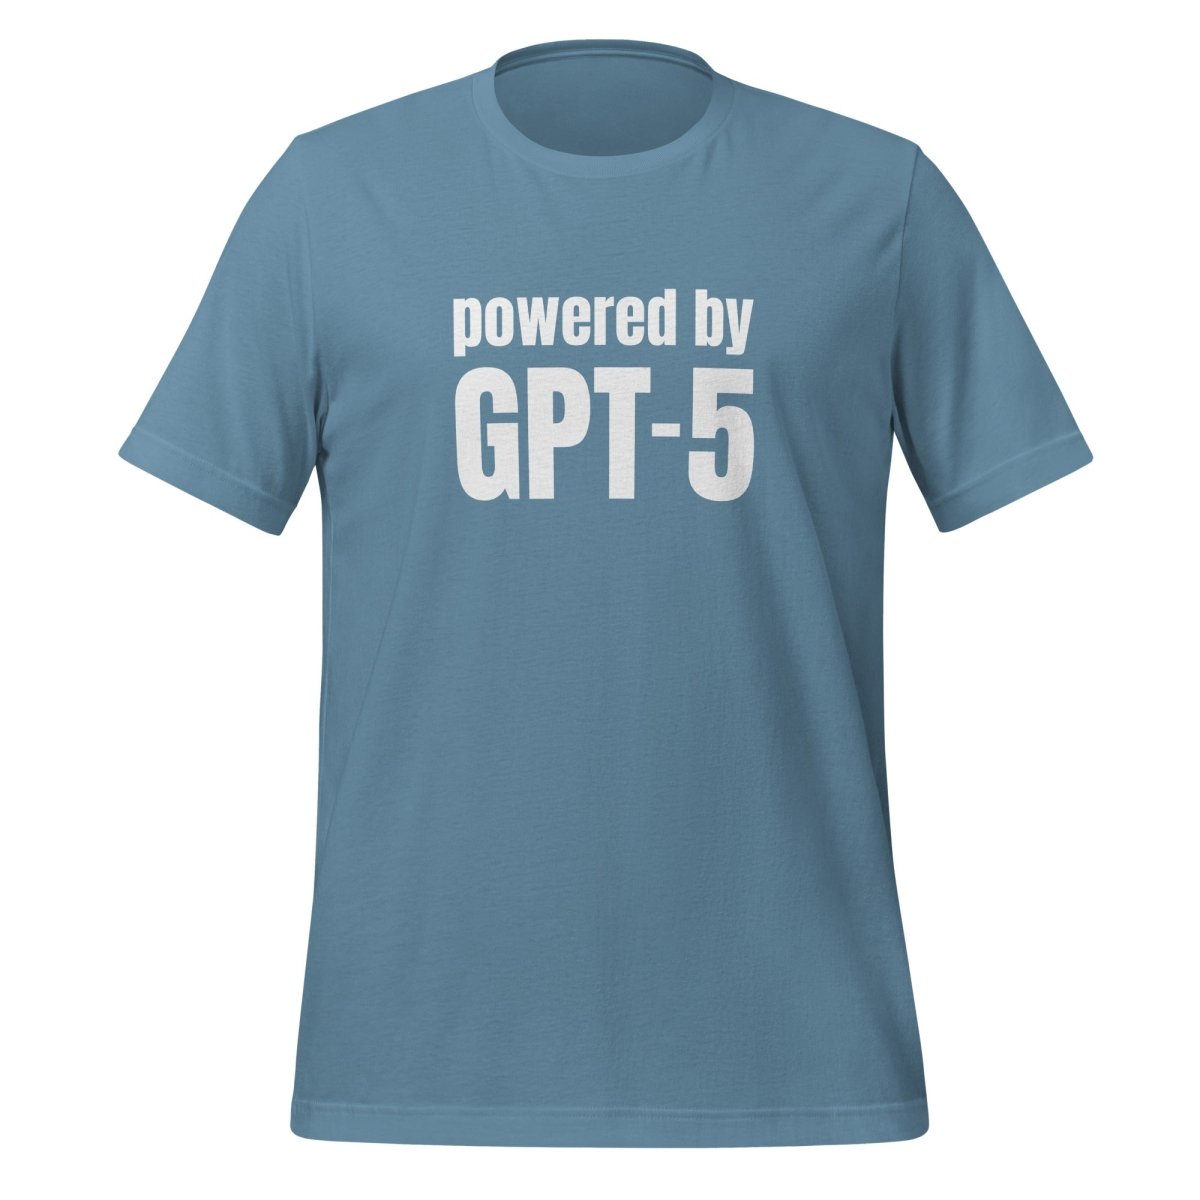 Powered by GPT - 5 T - Shirt (unisex) - Steel Blue - AI Store